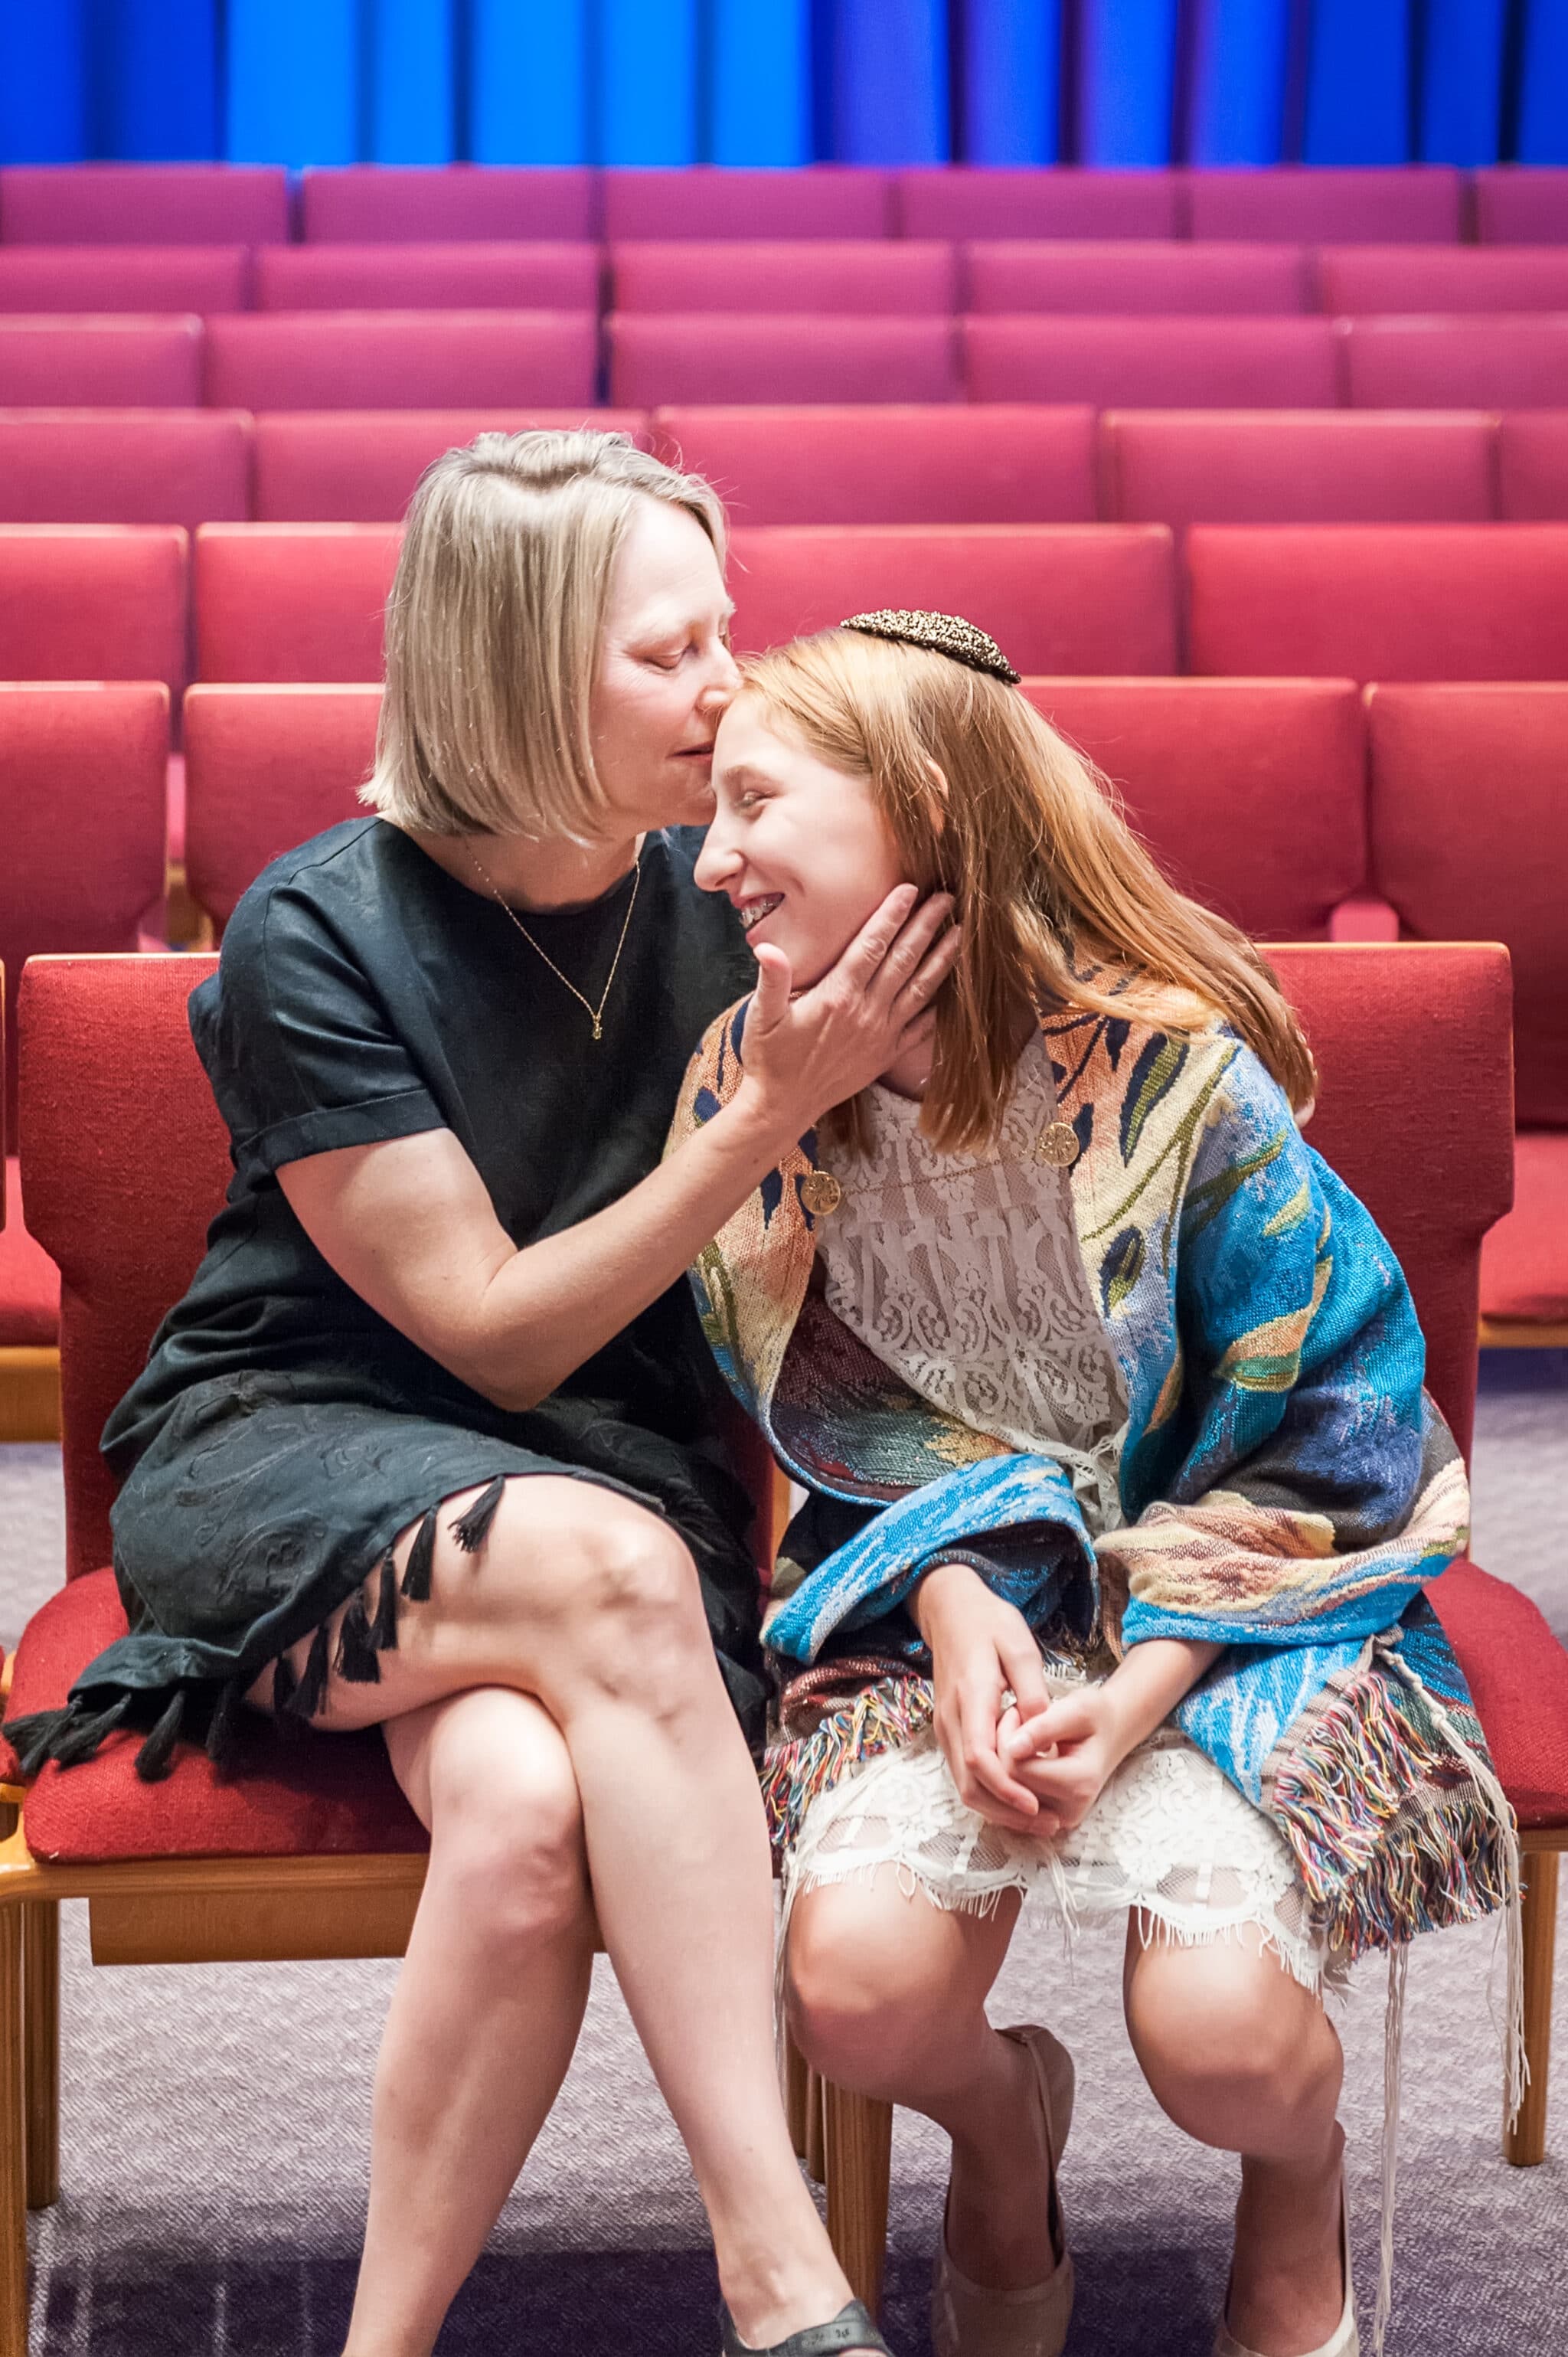 A mother and her daughter during a mitzvah practice.